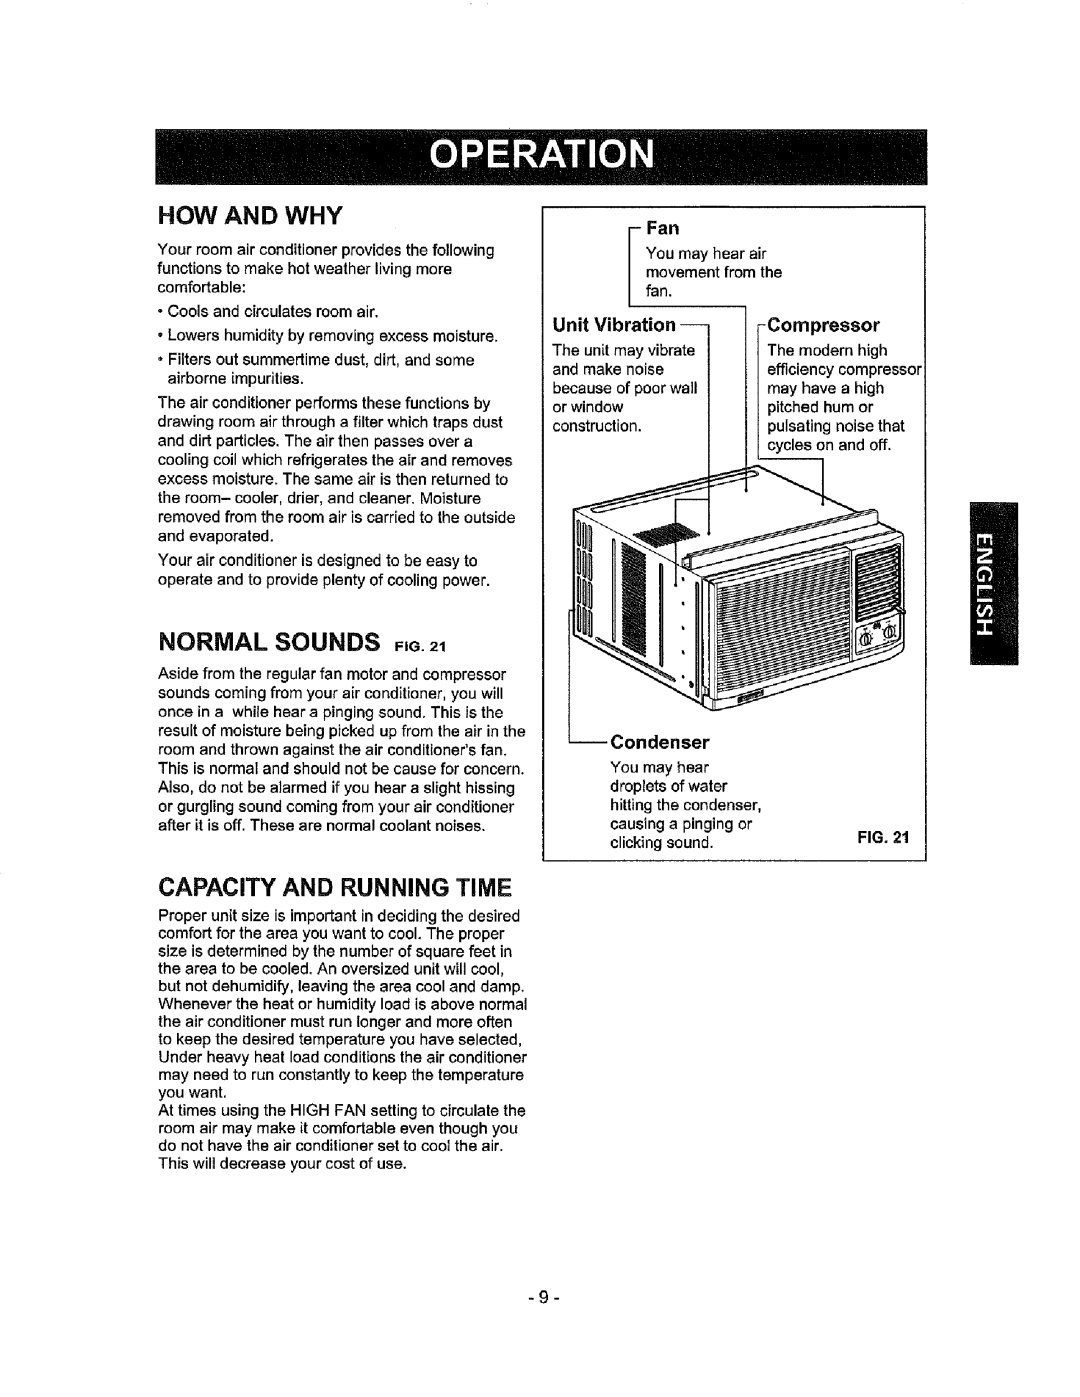 Kenmore 580.72184 owner manual How And Why, Capacity And Running Time, NORMAL SOUNDS FiG21 